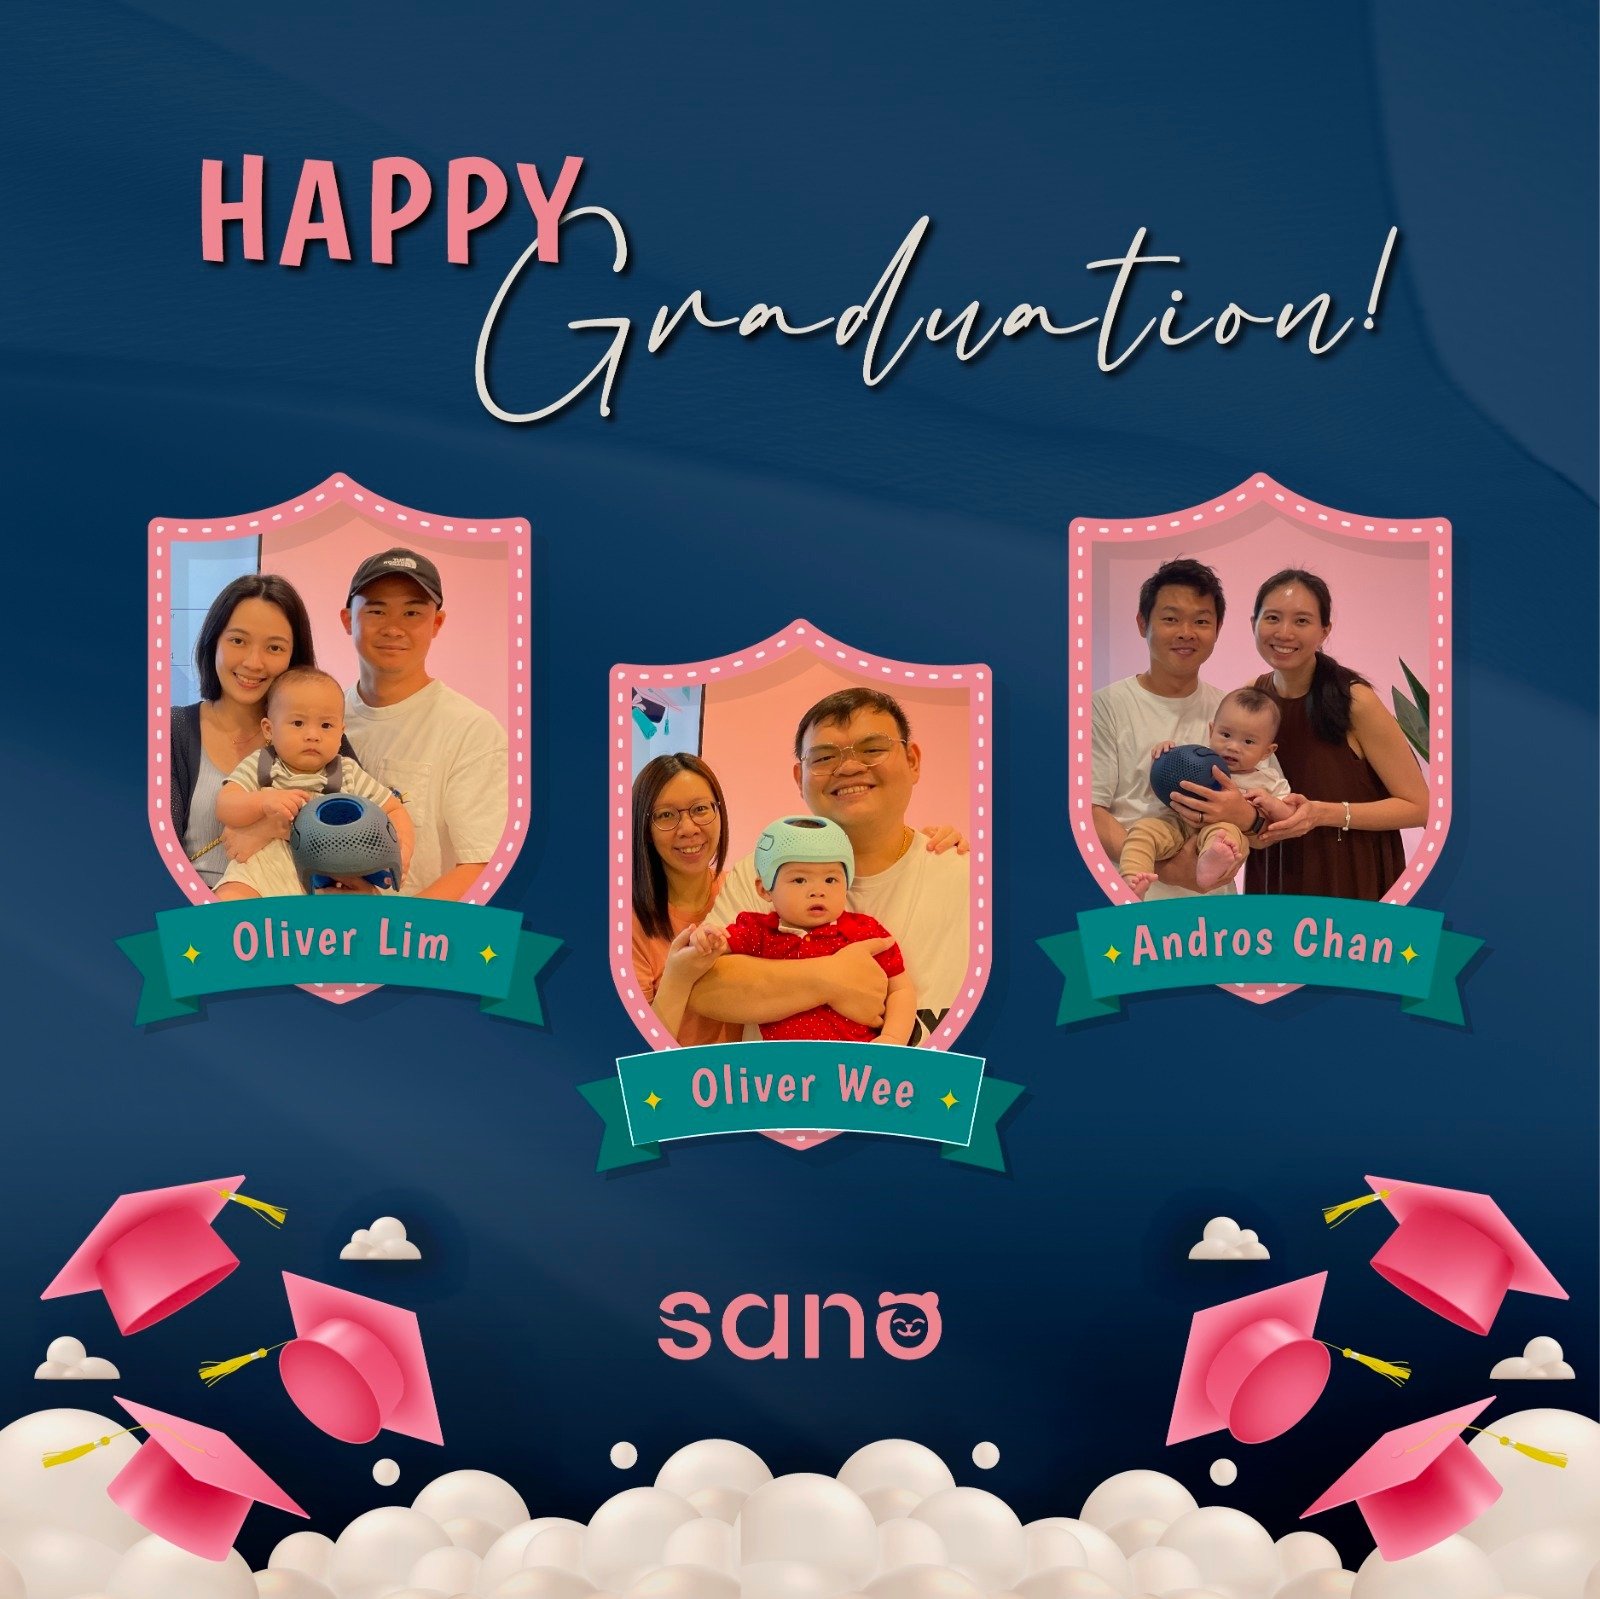 Cheers to our little graduates on their big day! 🎓🥳

👏 Congratulations to these adorable little ones and their families... Here's to a life filled with helmet-free snuggles! 

#sanoorthotics #sanoortho #babygraduation #happy #congrats #helmetfree